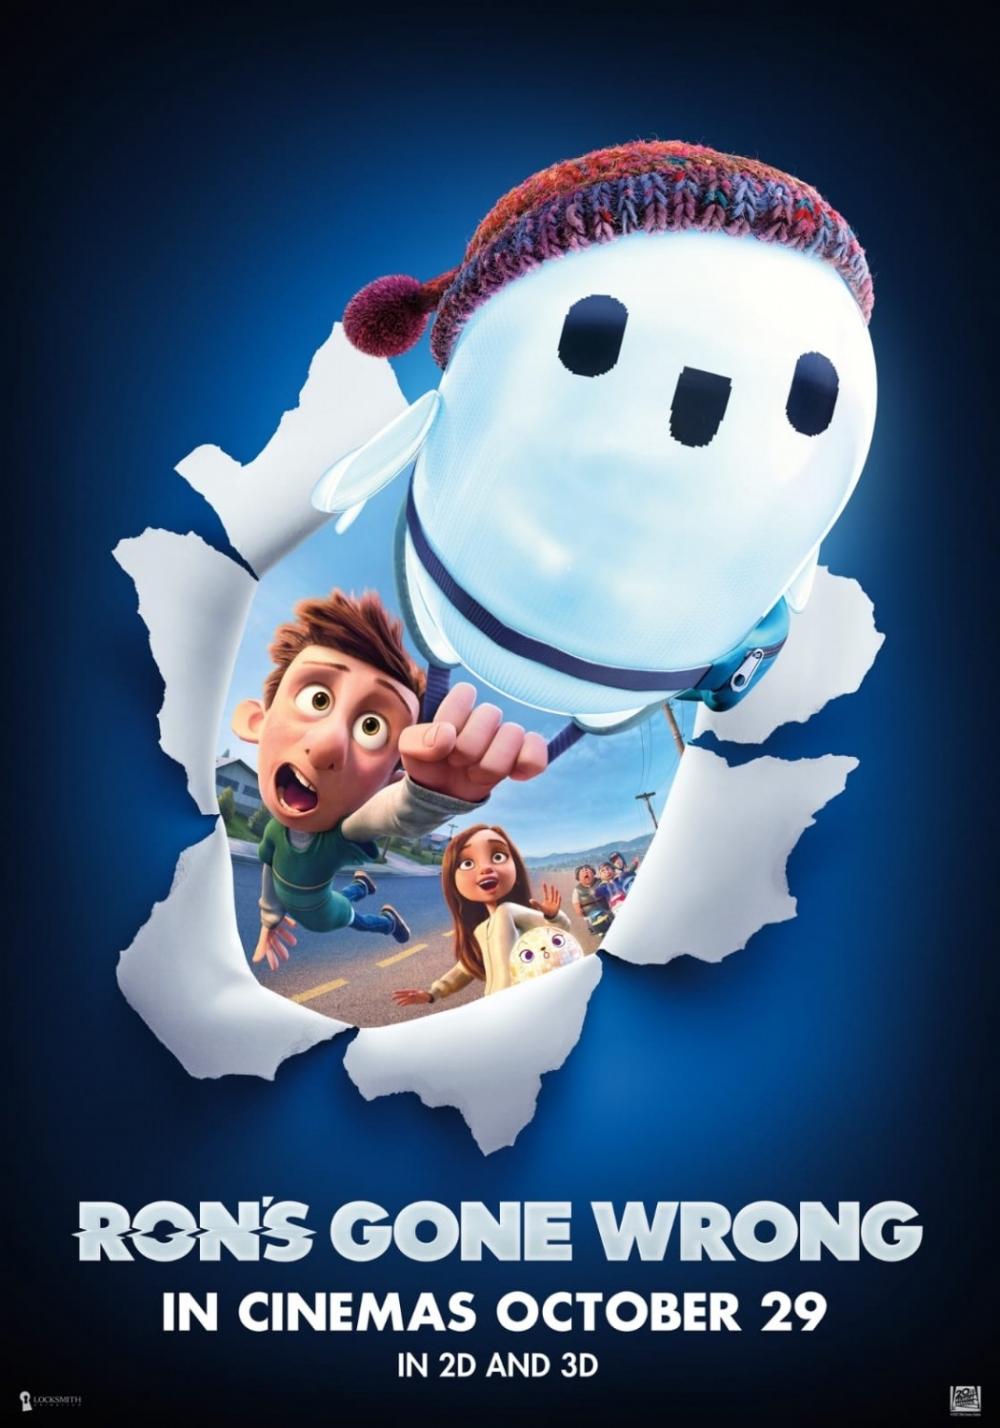 The Weekend Leader - Animated film 'Ron's Gone Wrong' to release on Oct 29 in India